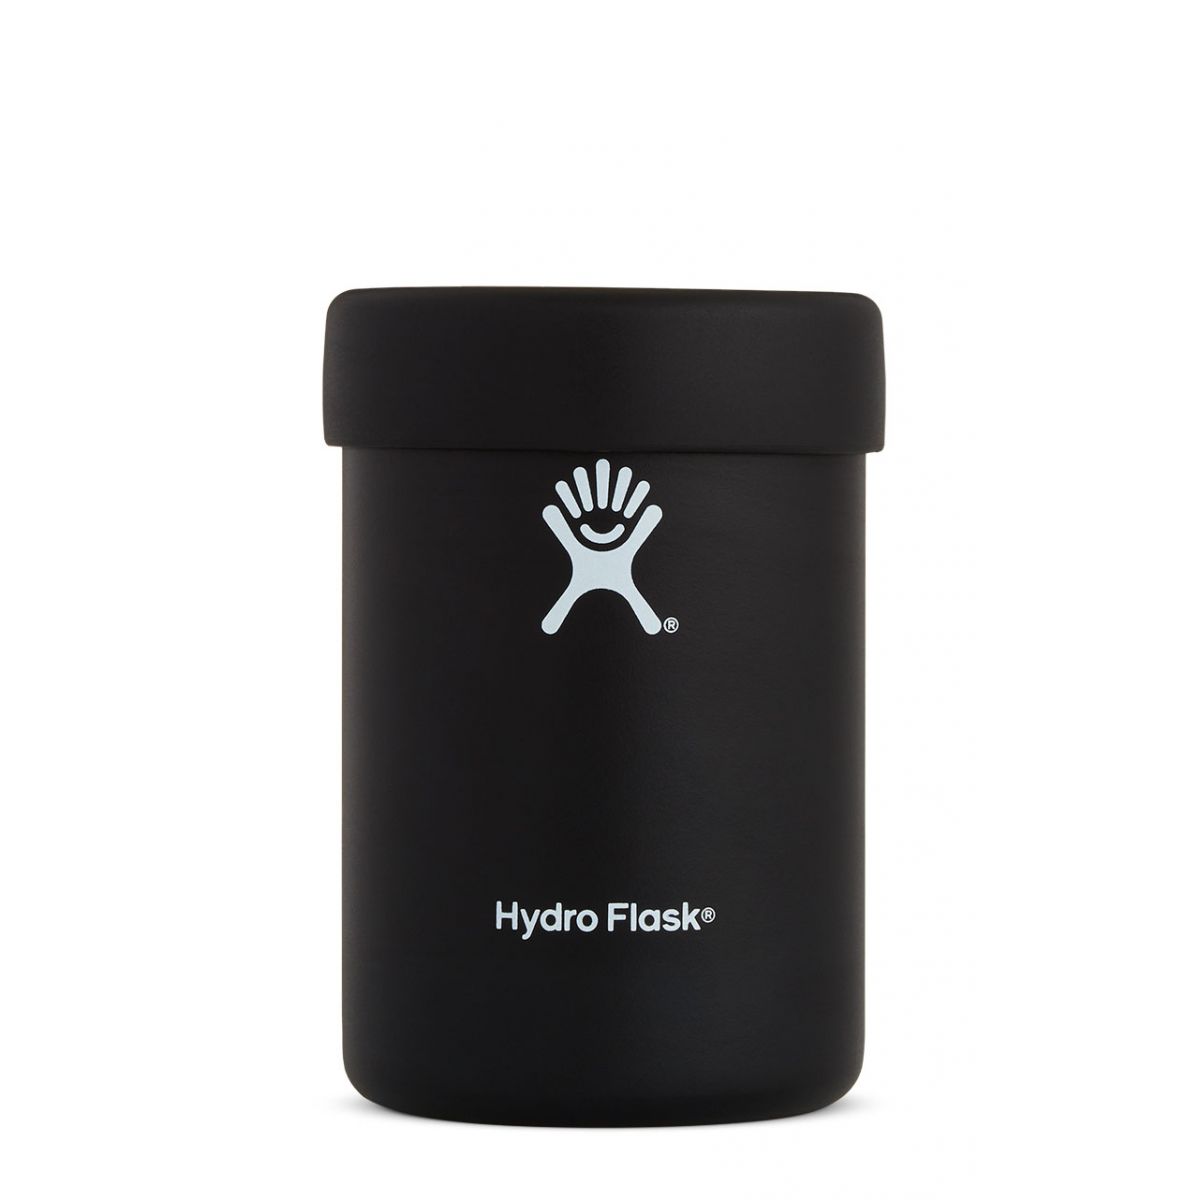 Hydro Flask 12 oz Cooler Cup